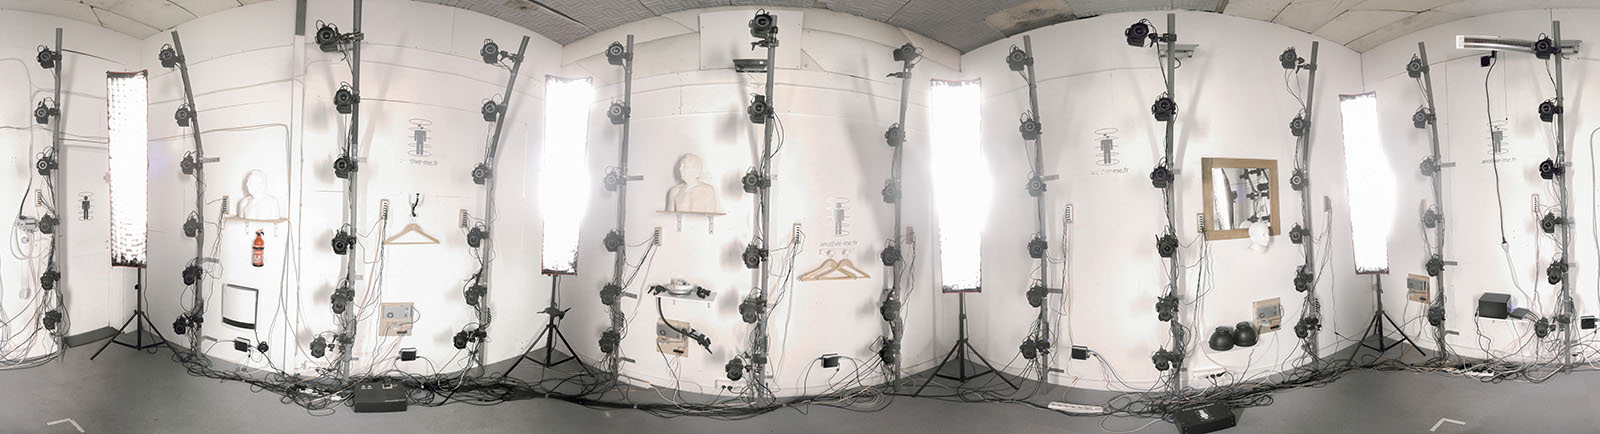 360° image of Another me studio with multi-cams rig